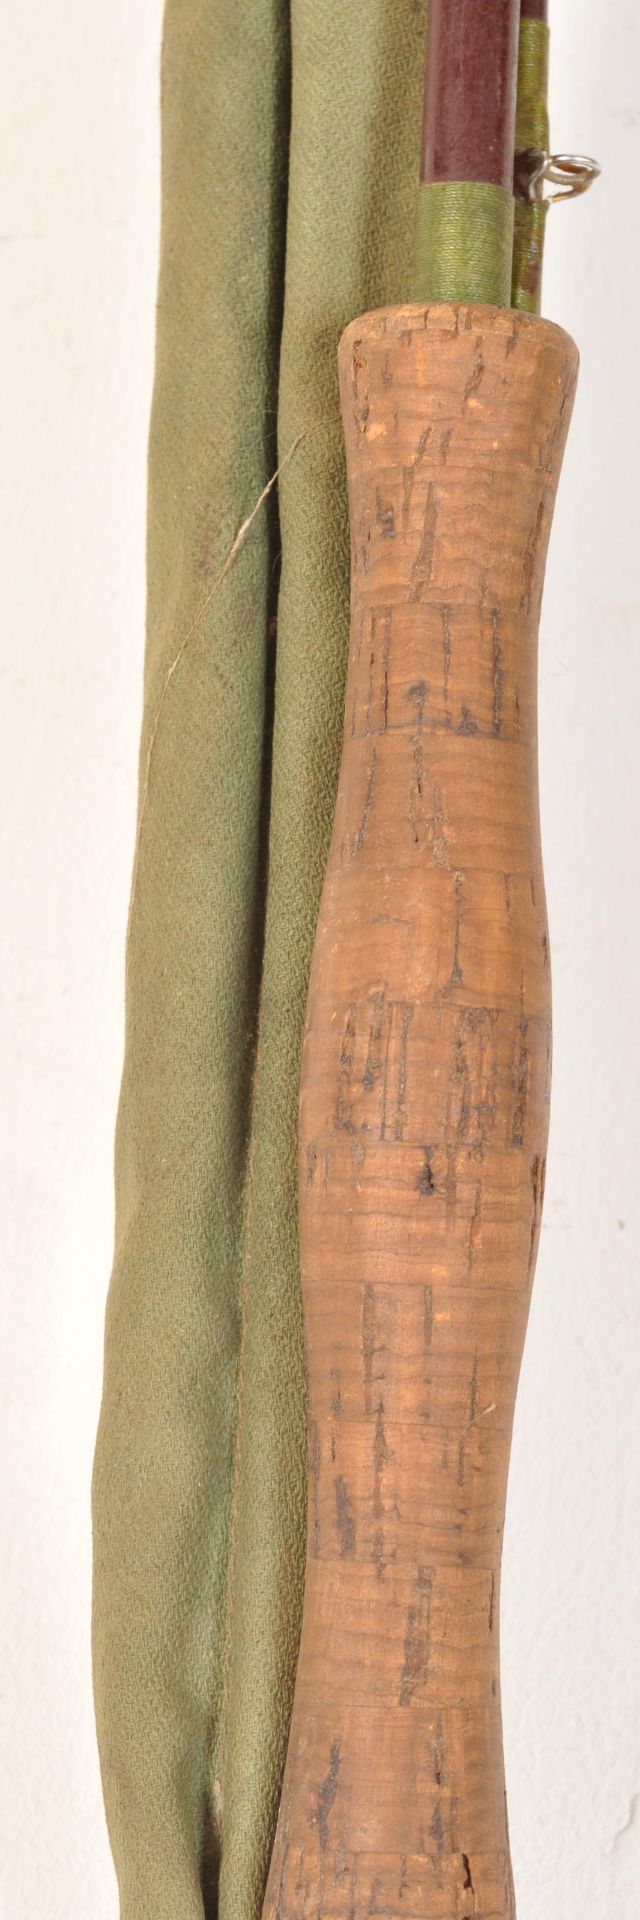 TWO 20TH CENTURY FISHING RODS - Image 3 of 5